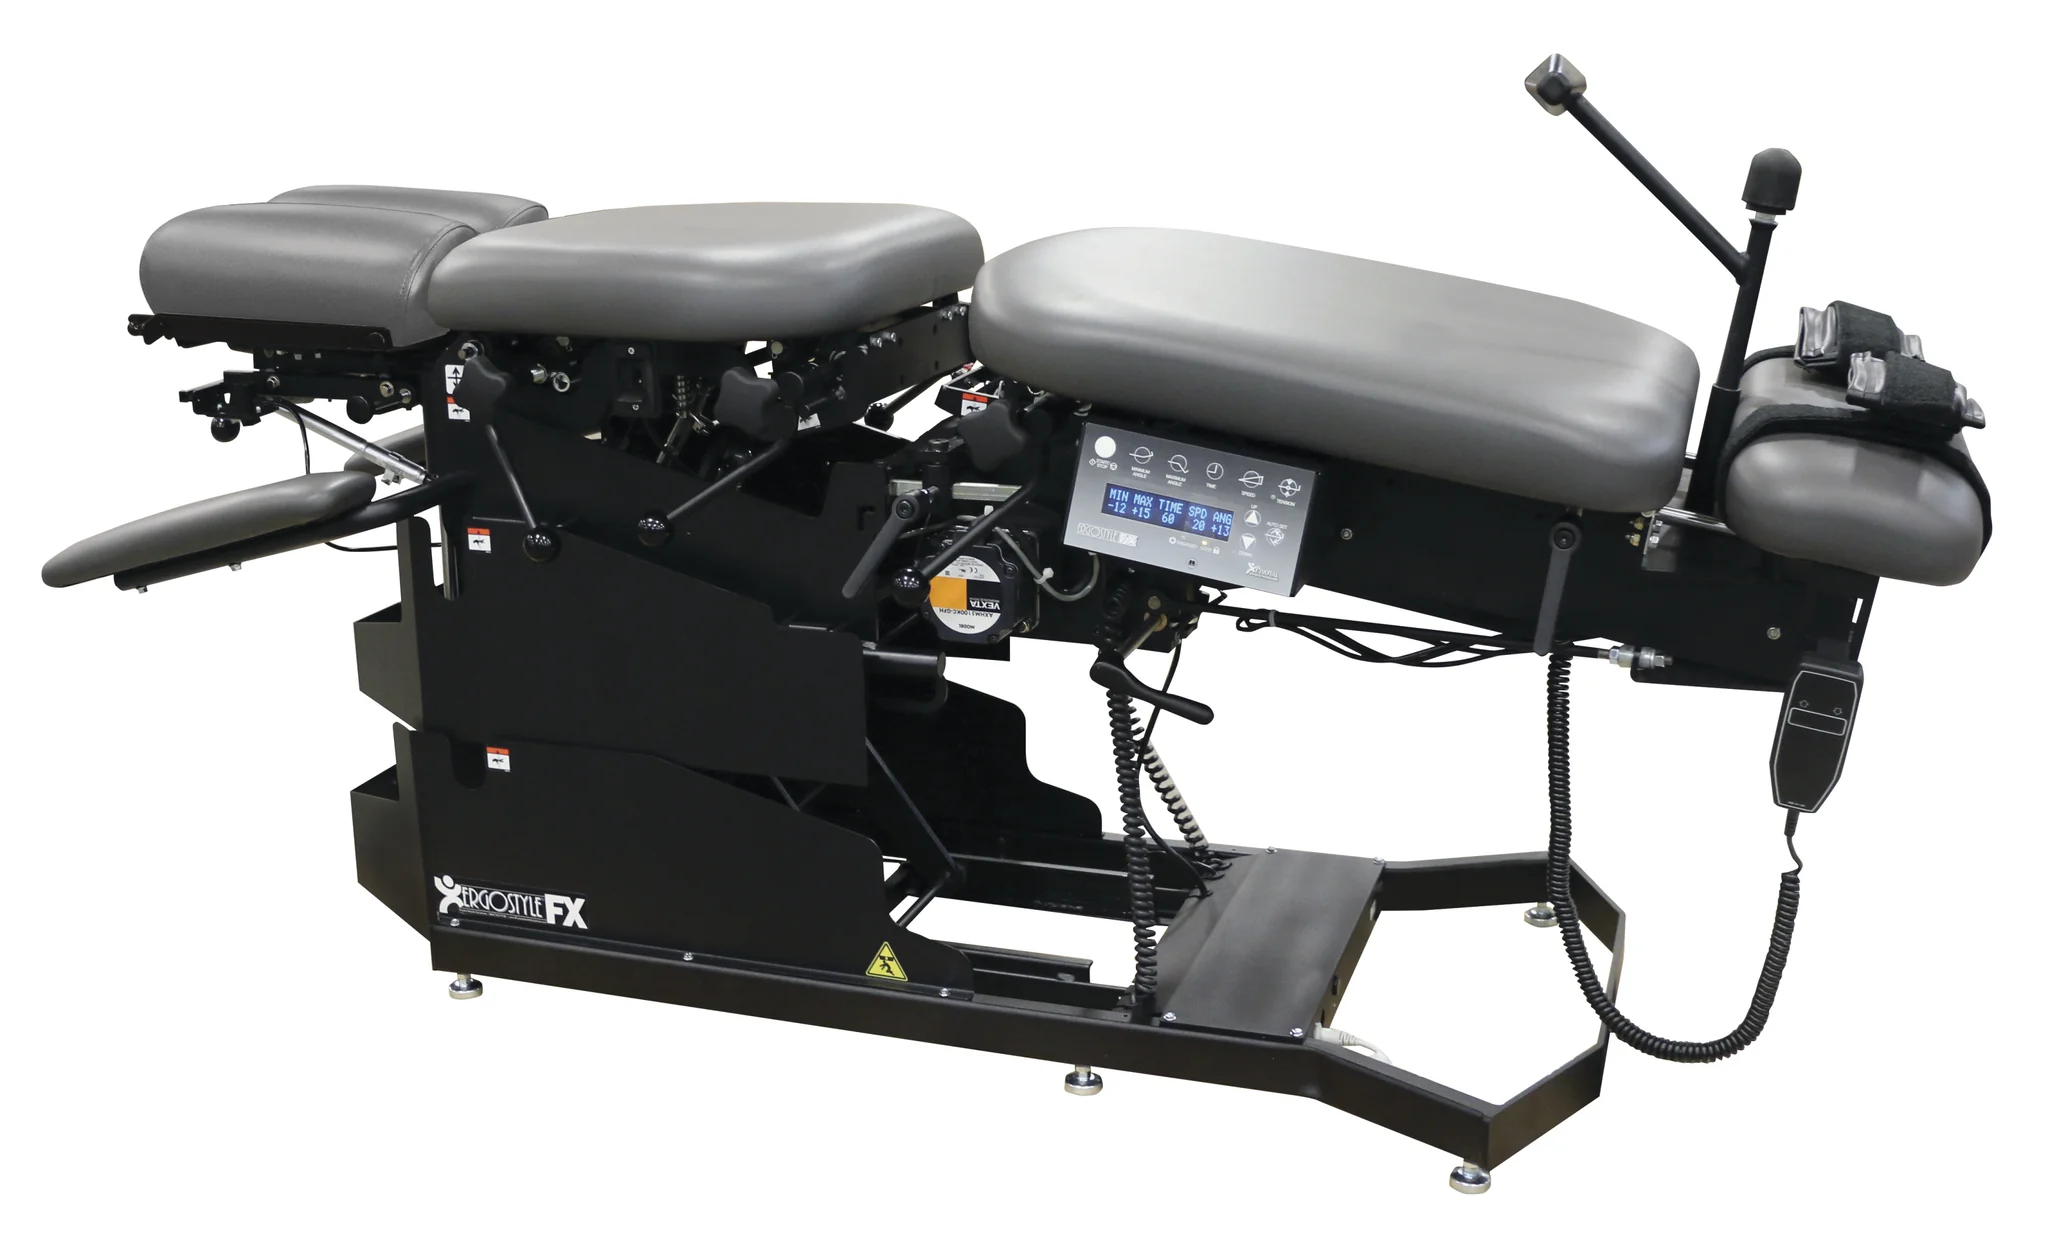 Pivotal ErgoStyle FX Flexion Distraction Chiropractic Adjusting Table with Elevation and Automated and Manual Flexion